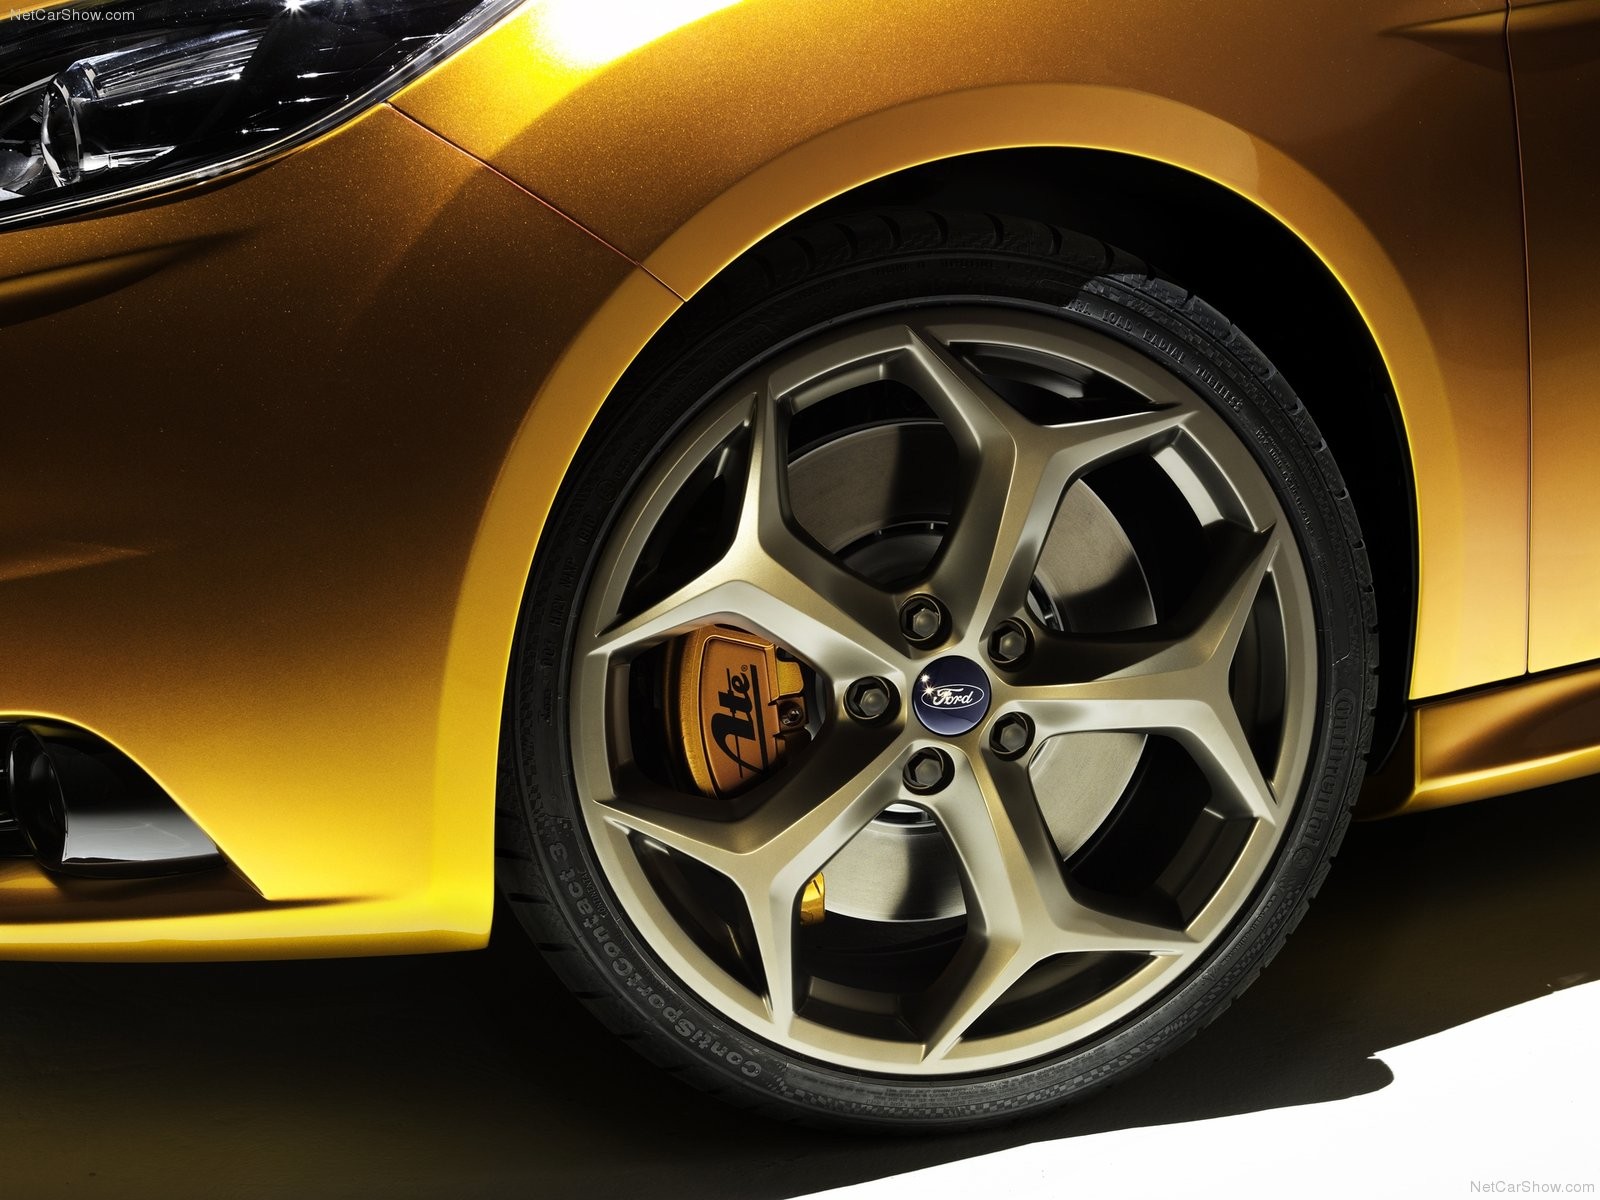 cars, Gold, Wheels, Ford, Focus, Ford, Focus, St Wallpaper